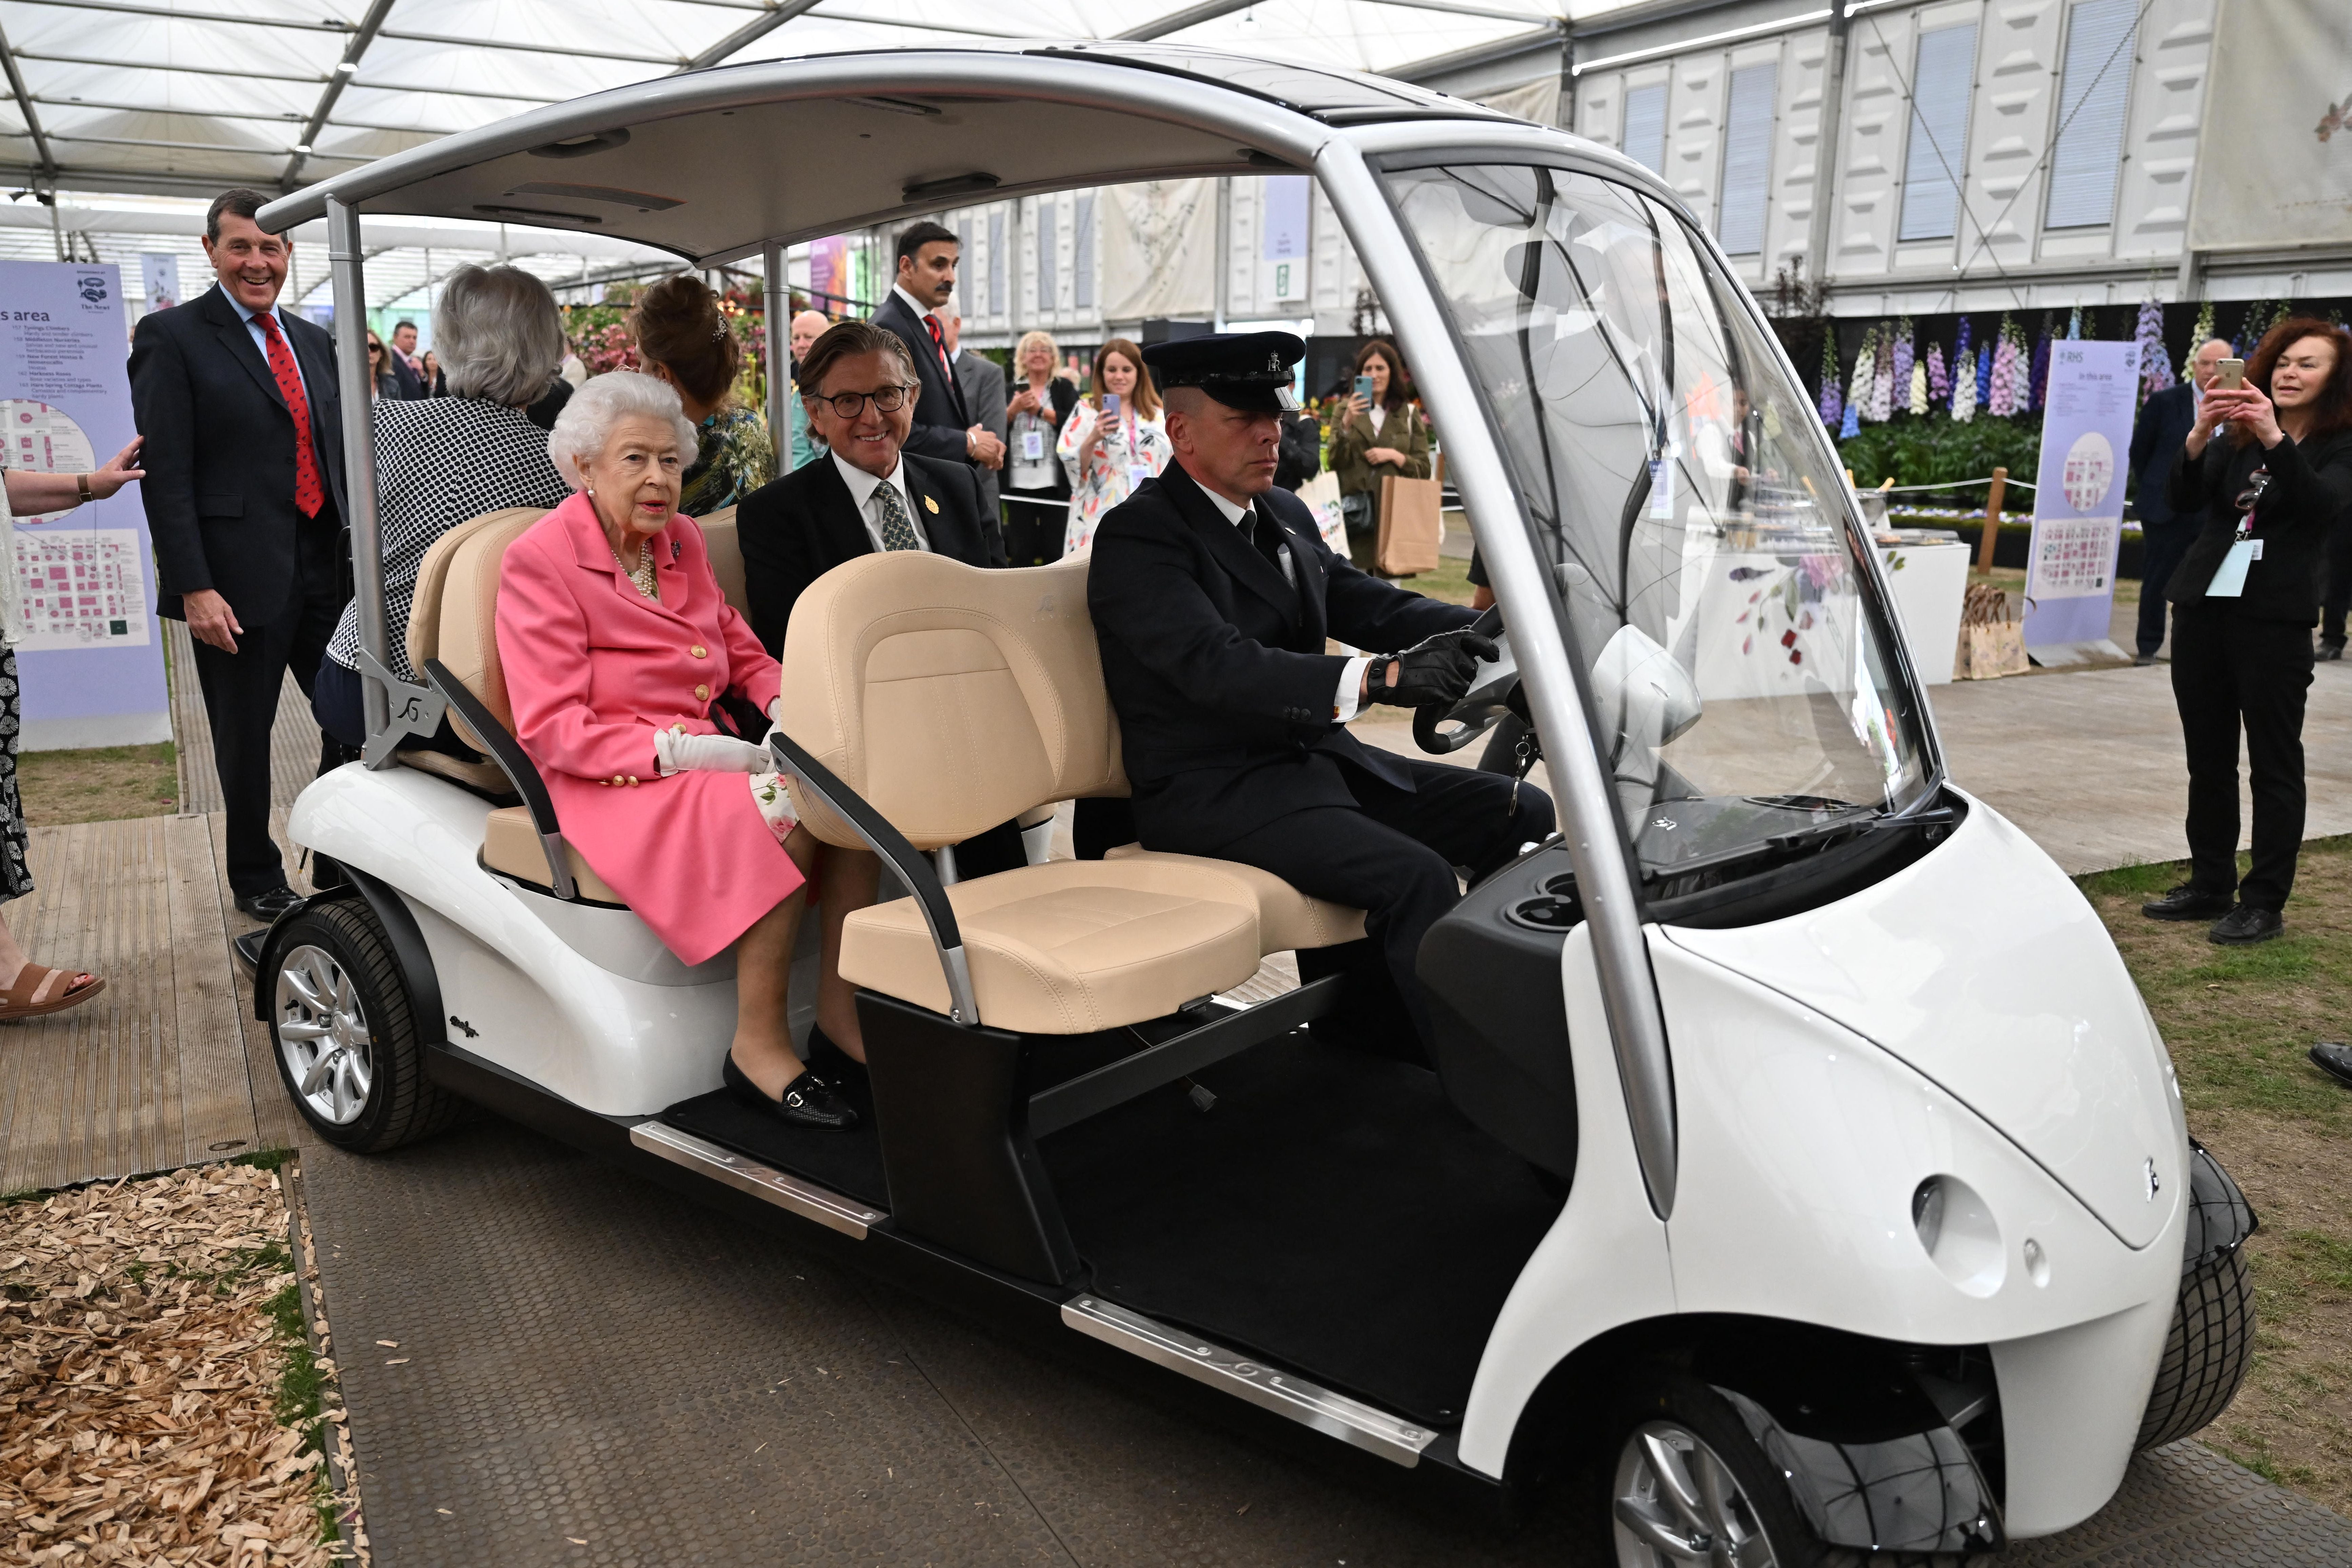 The Queen attends Chelsea Flower Show in a buggy